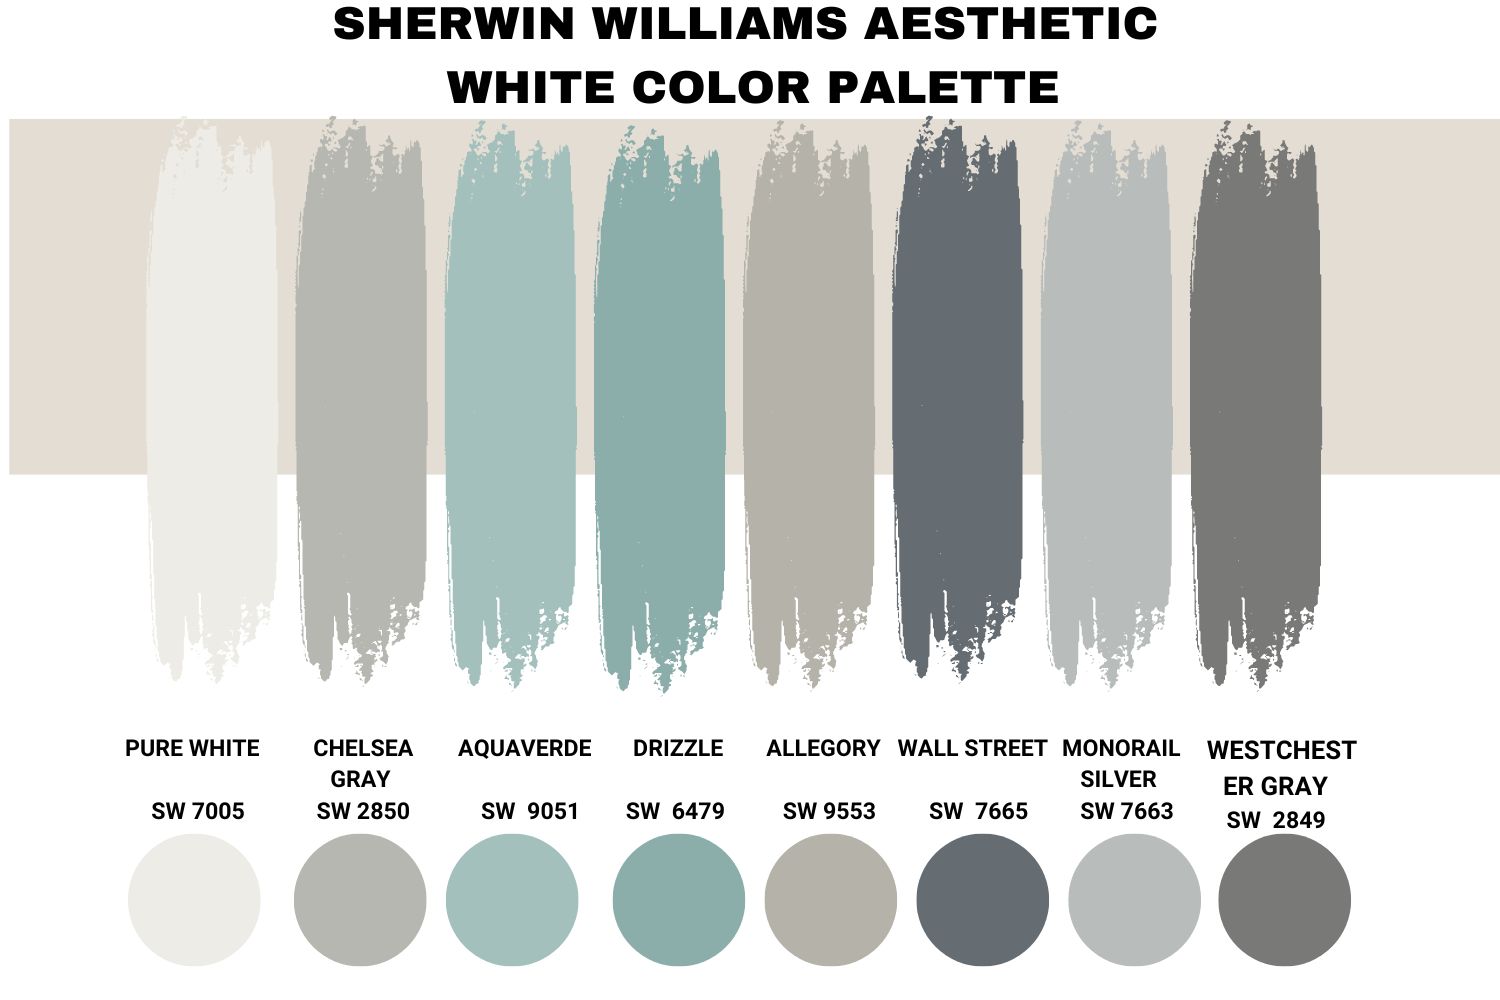 Sherwin Williams Aesthetic White Color Palette